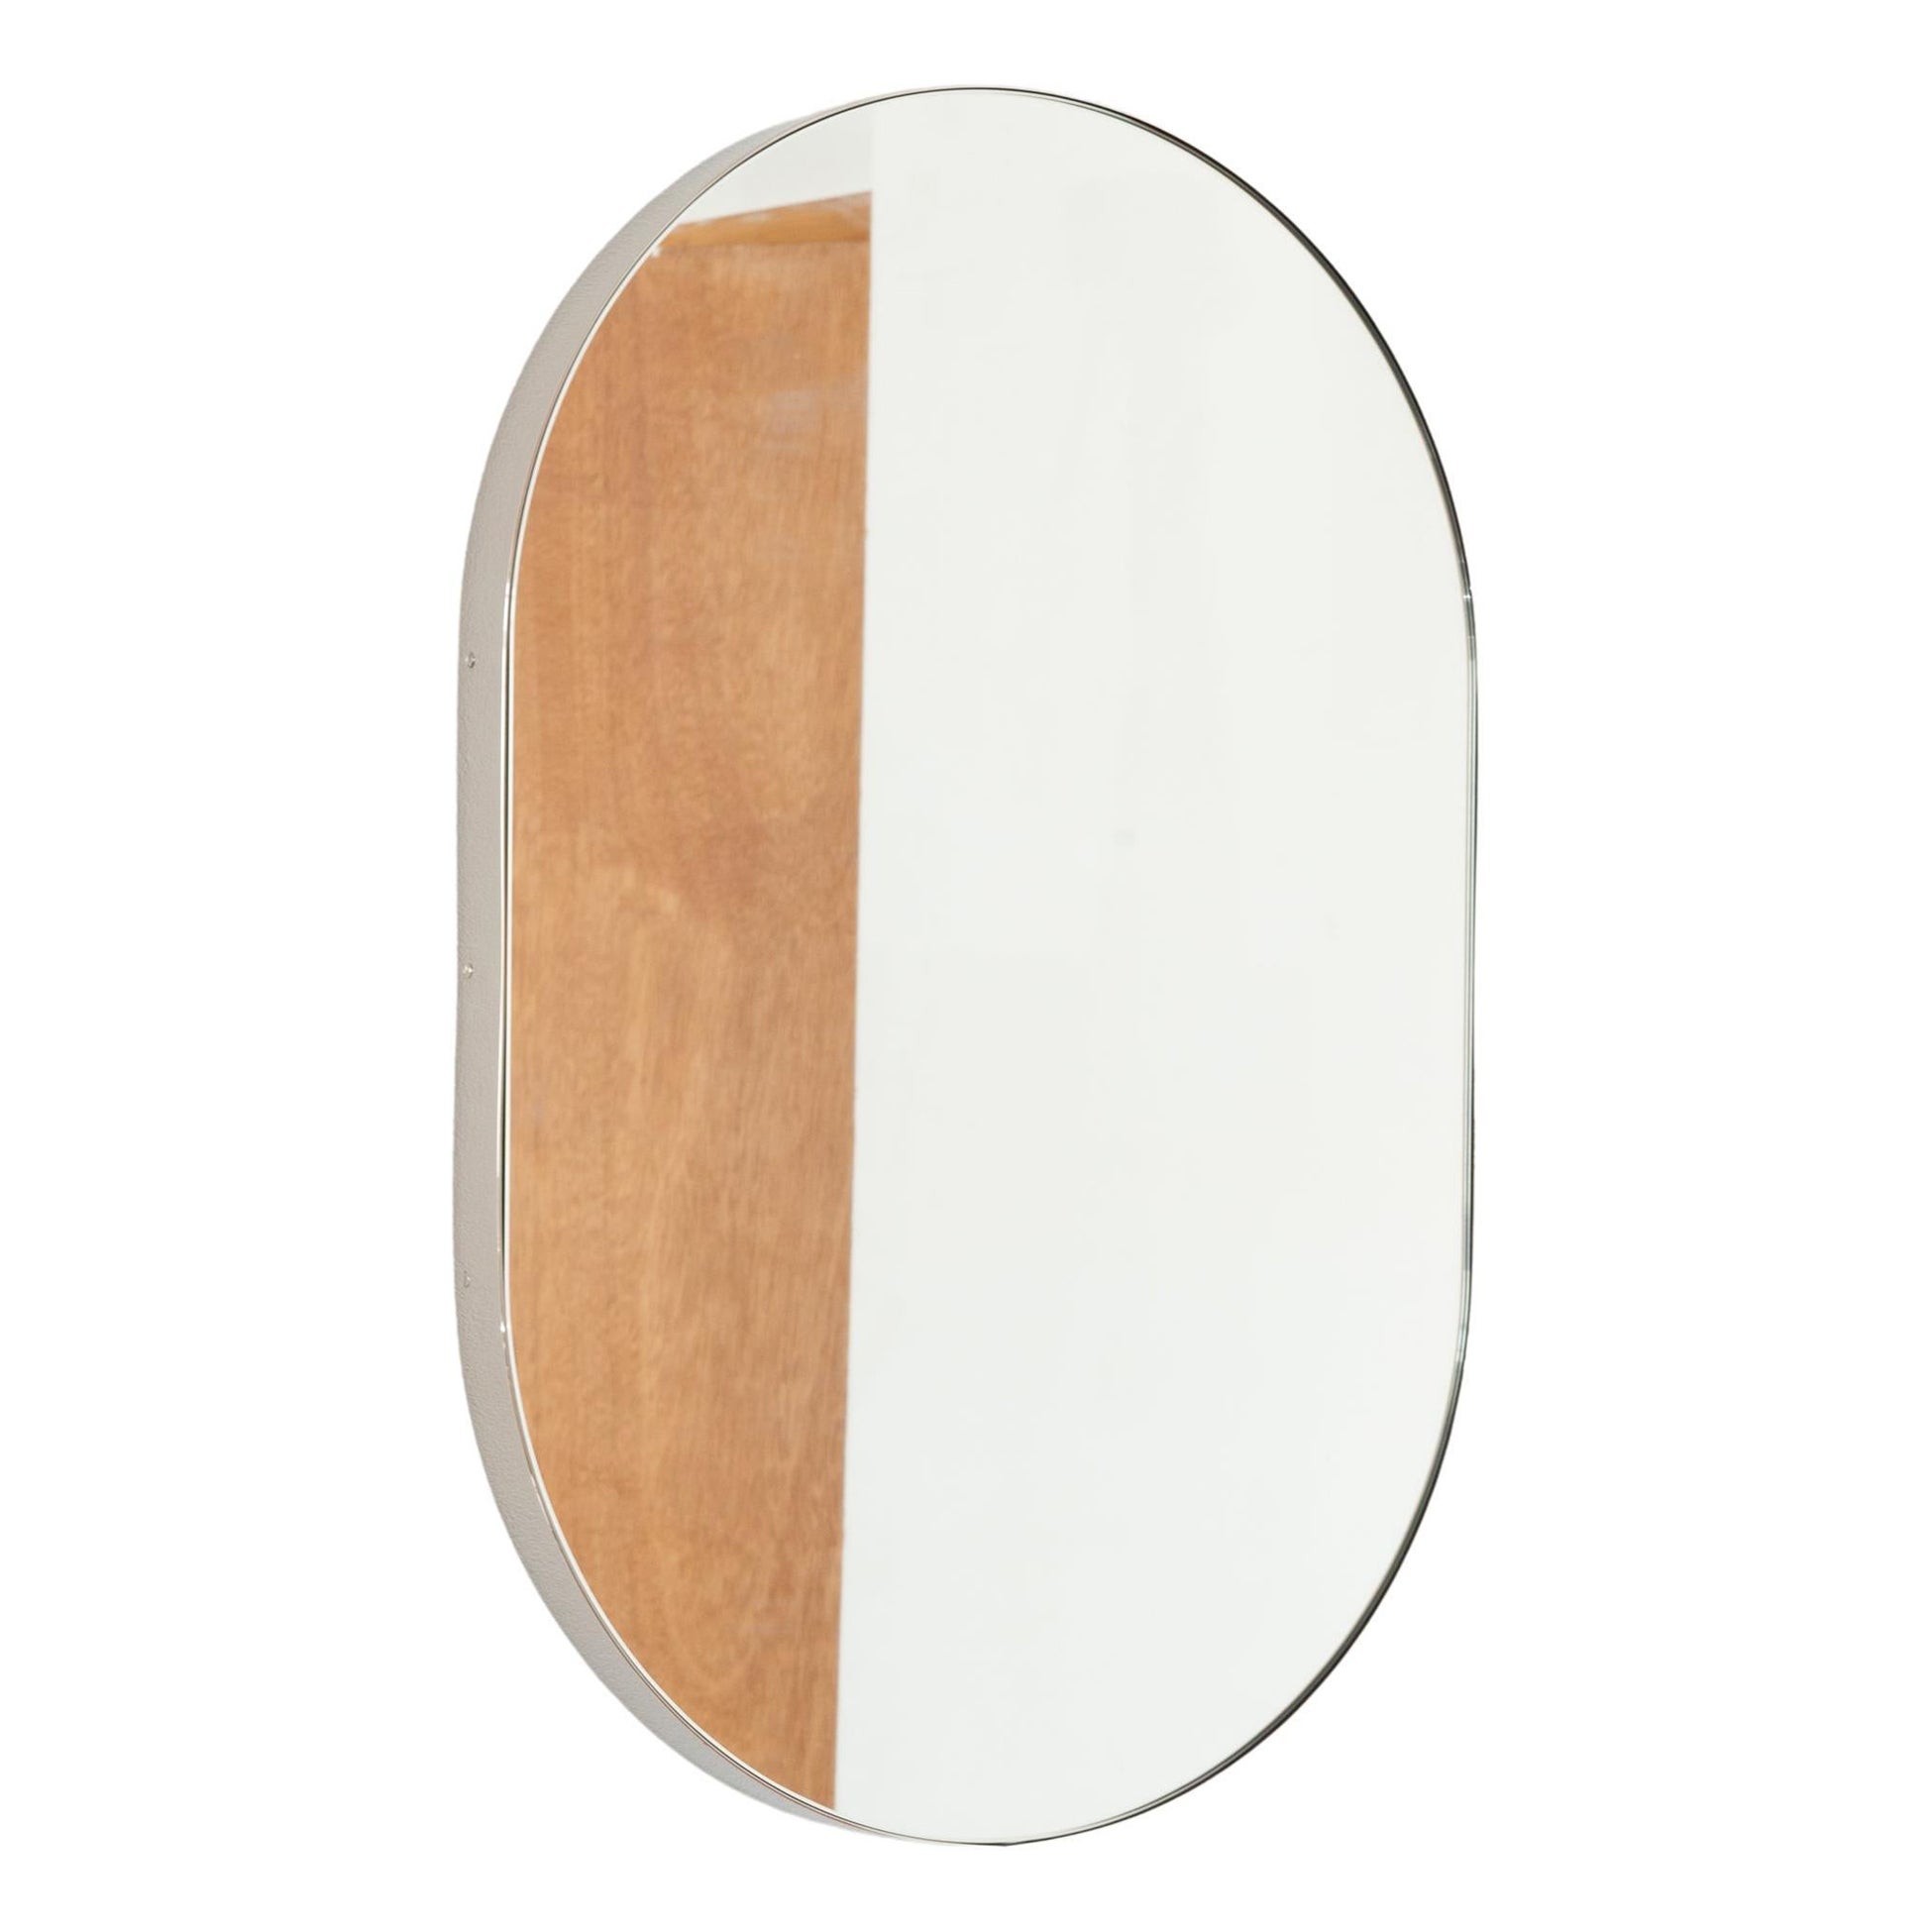 Capsula Pill Shaped Modern Bathroom Mirror with Nickel Plated Frame, XL For Sale